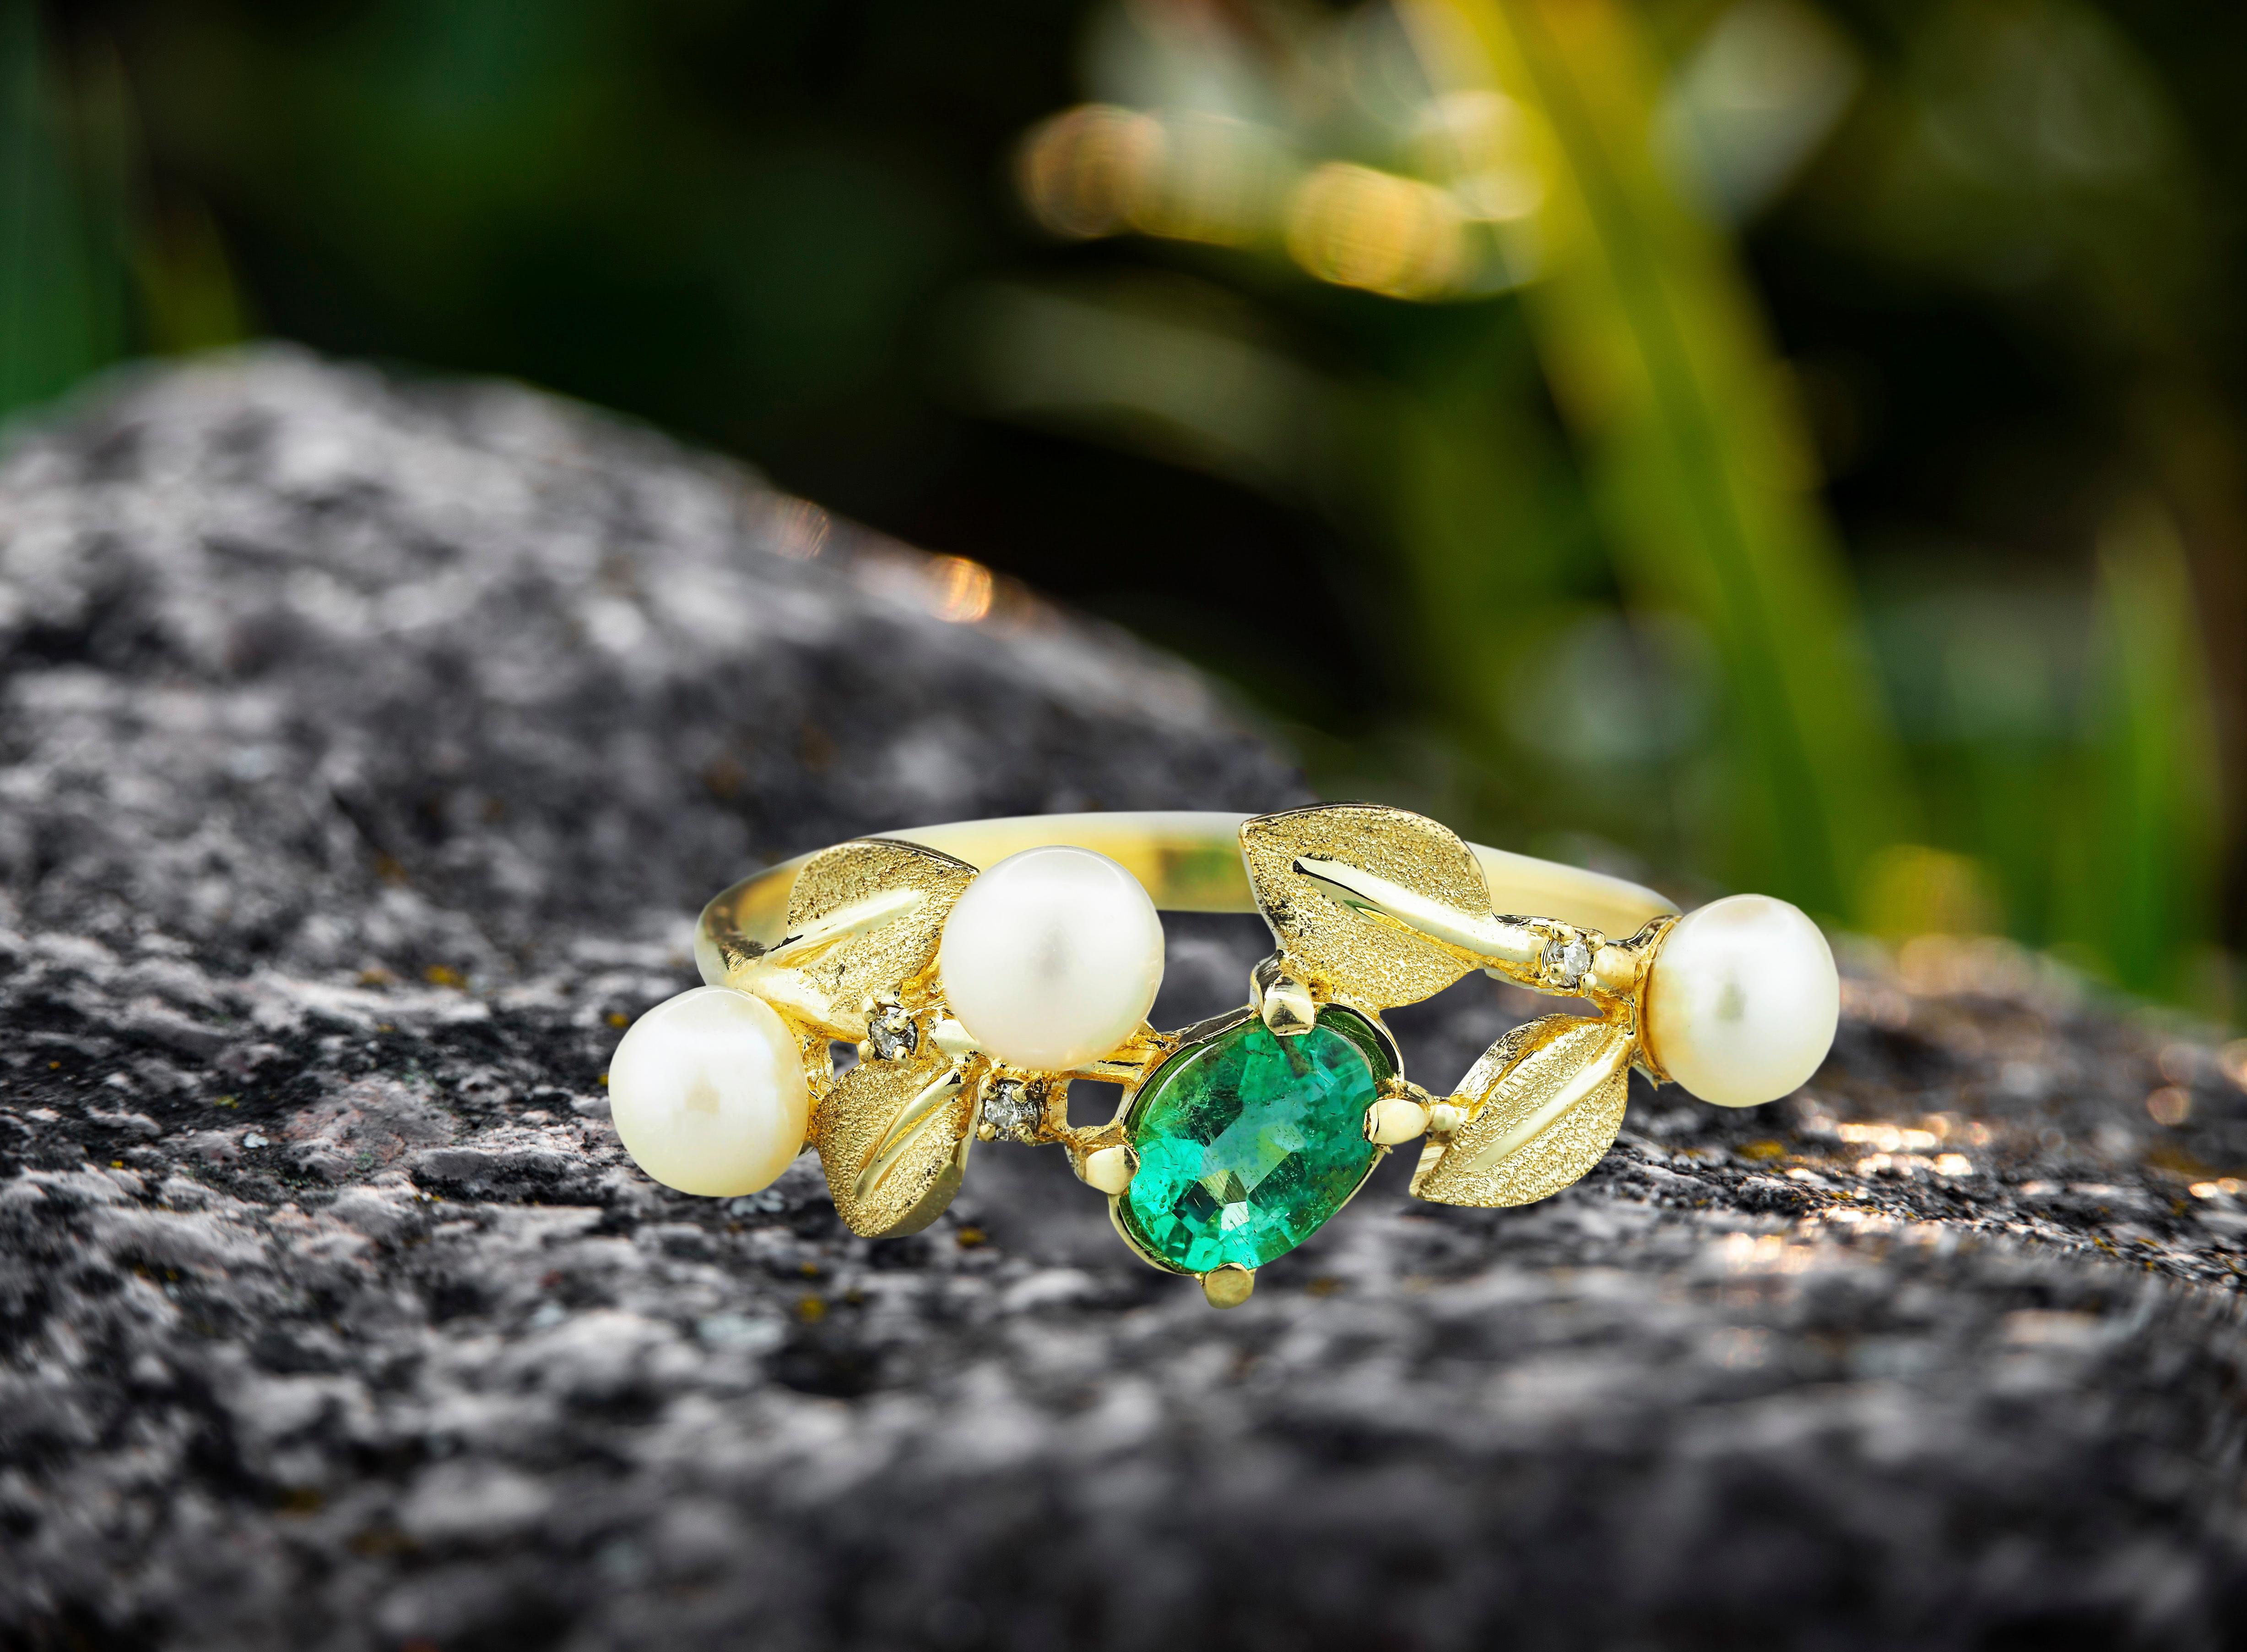 14k Gold Ring with Emerald, Pearls and Diamonds 1